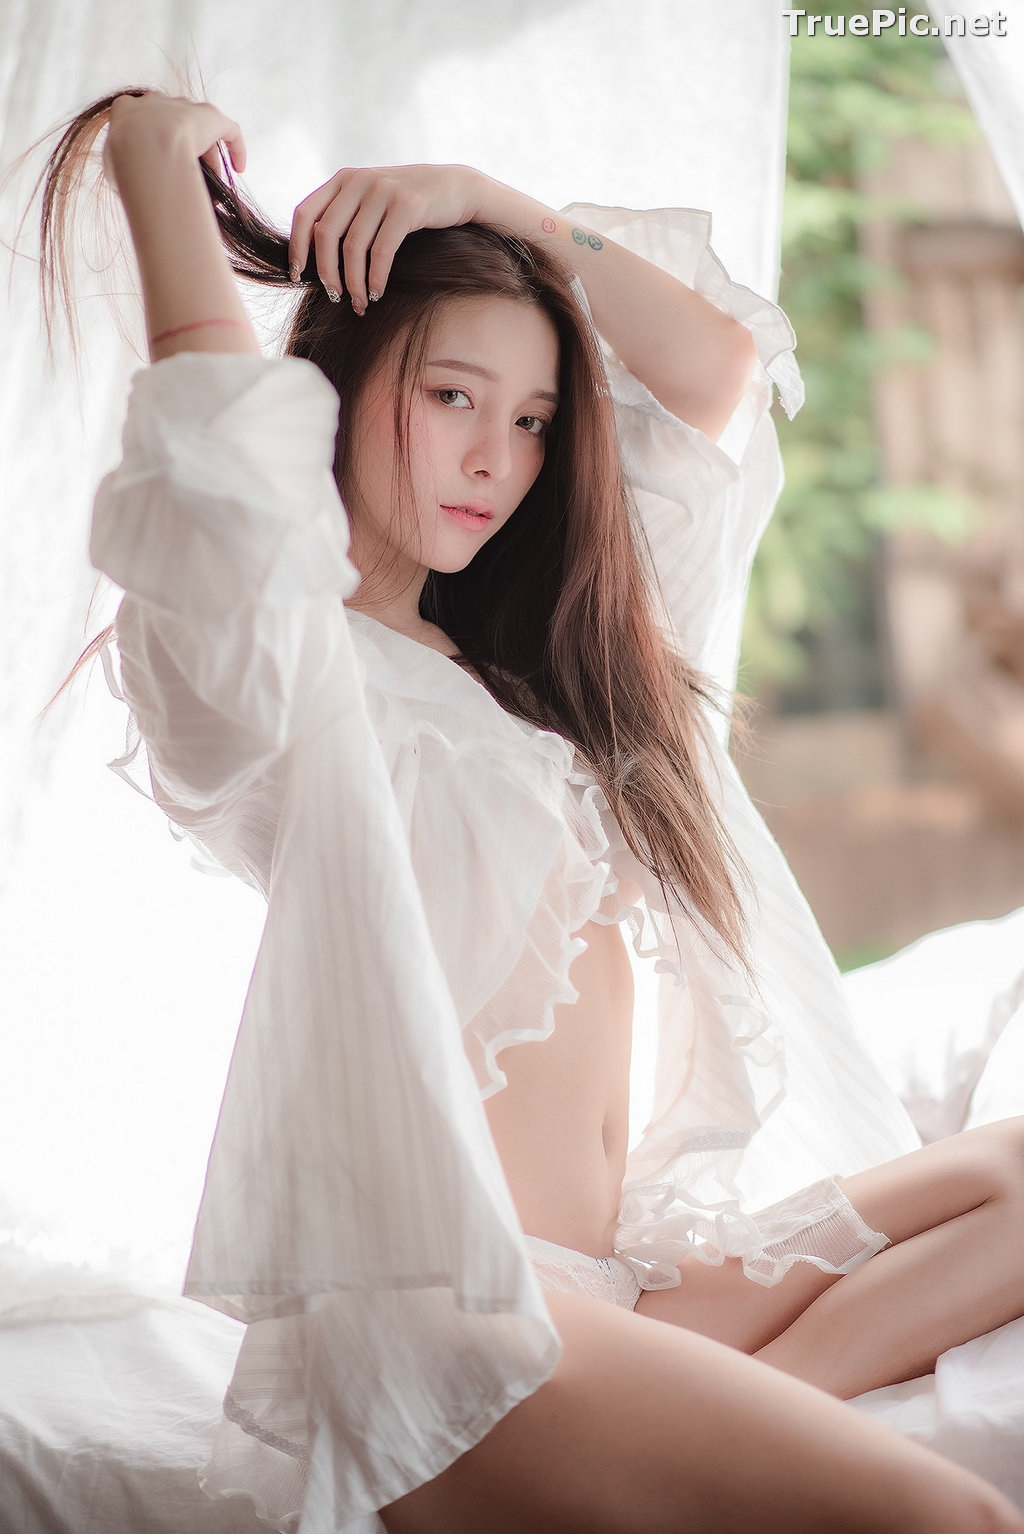 Image Thailand Model - Nardear Montgod - Sexy Beautiful In White - TruePic.net - Picture-16